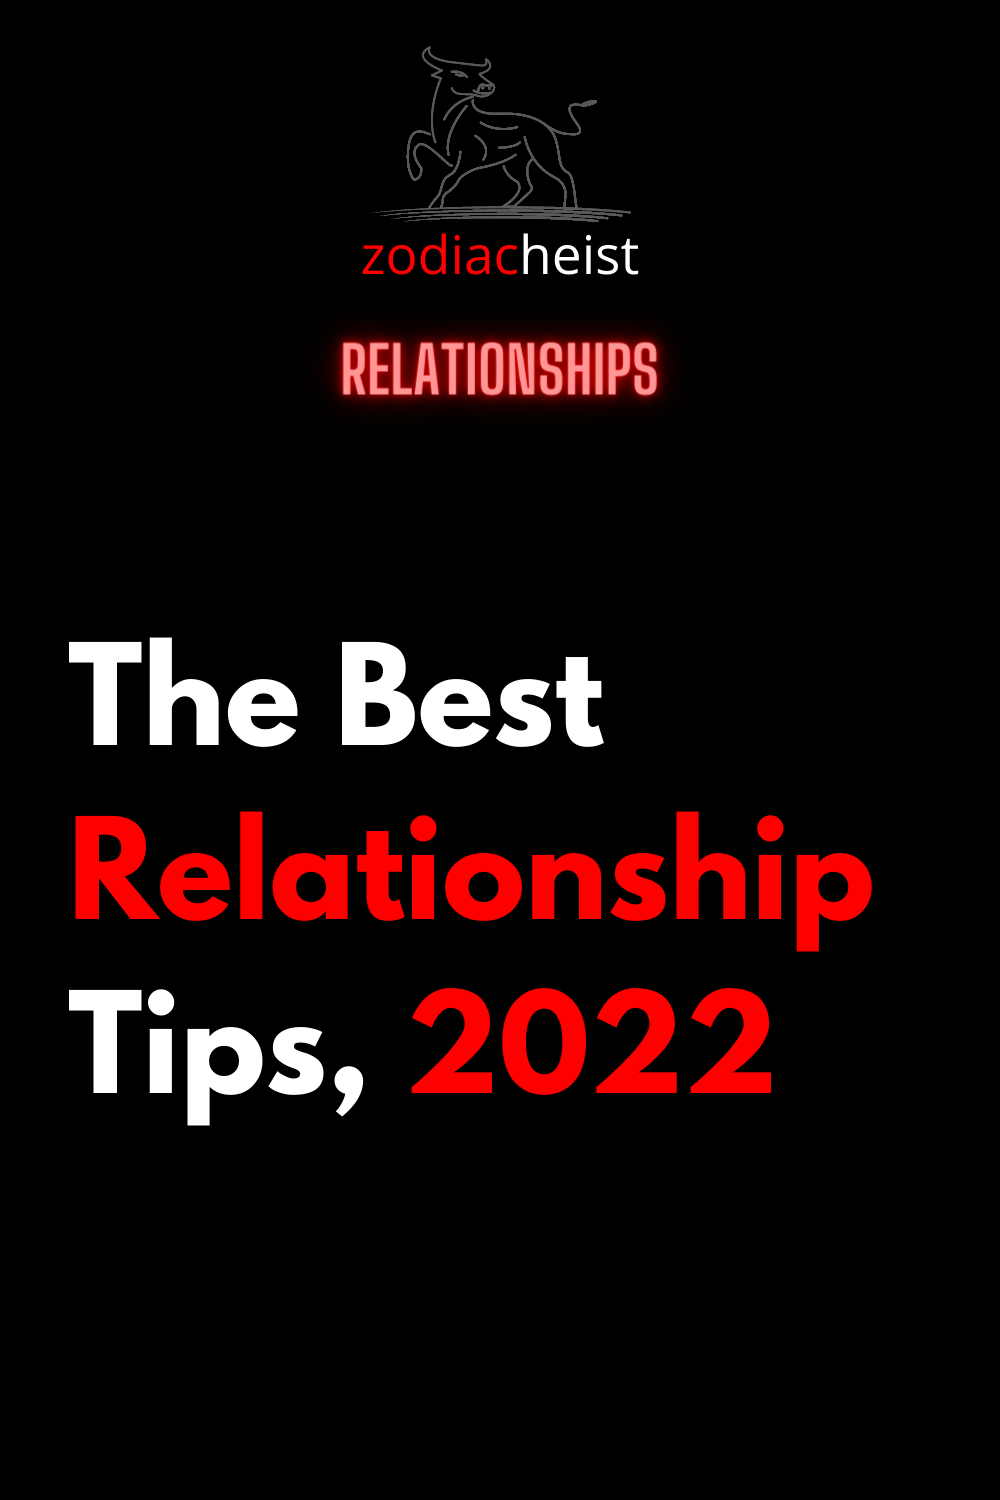 The Best Relationship Tips, 2022